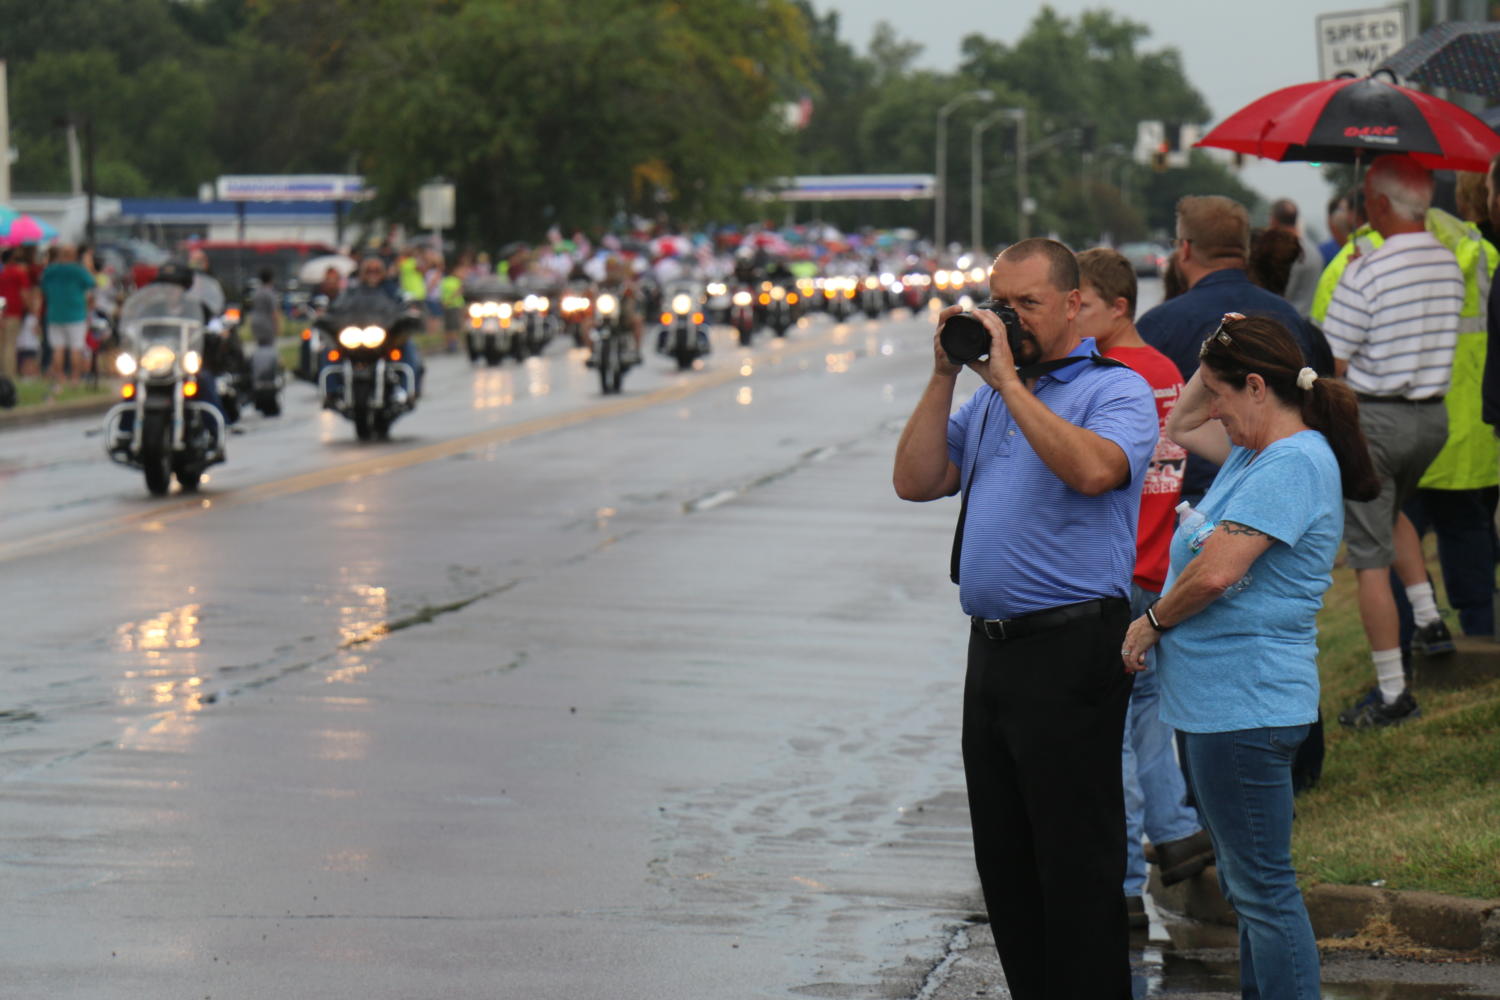 A community member pauses in photographing the procession as veteran motorcyclists pass. 